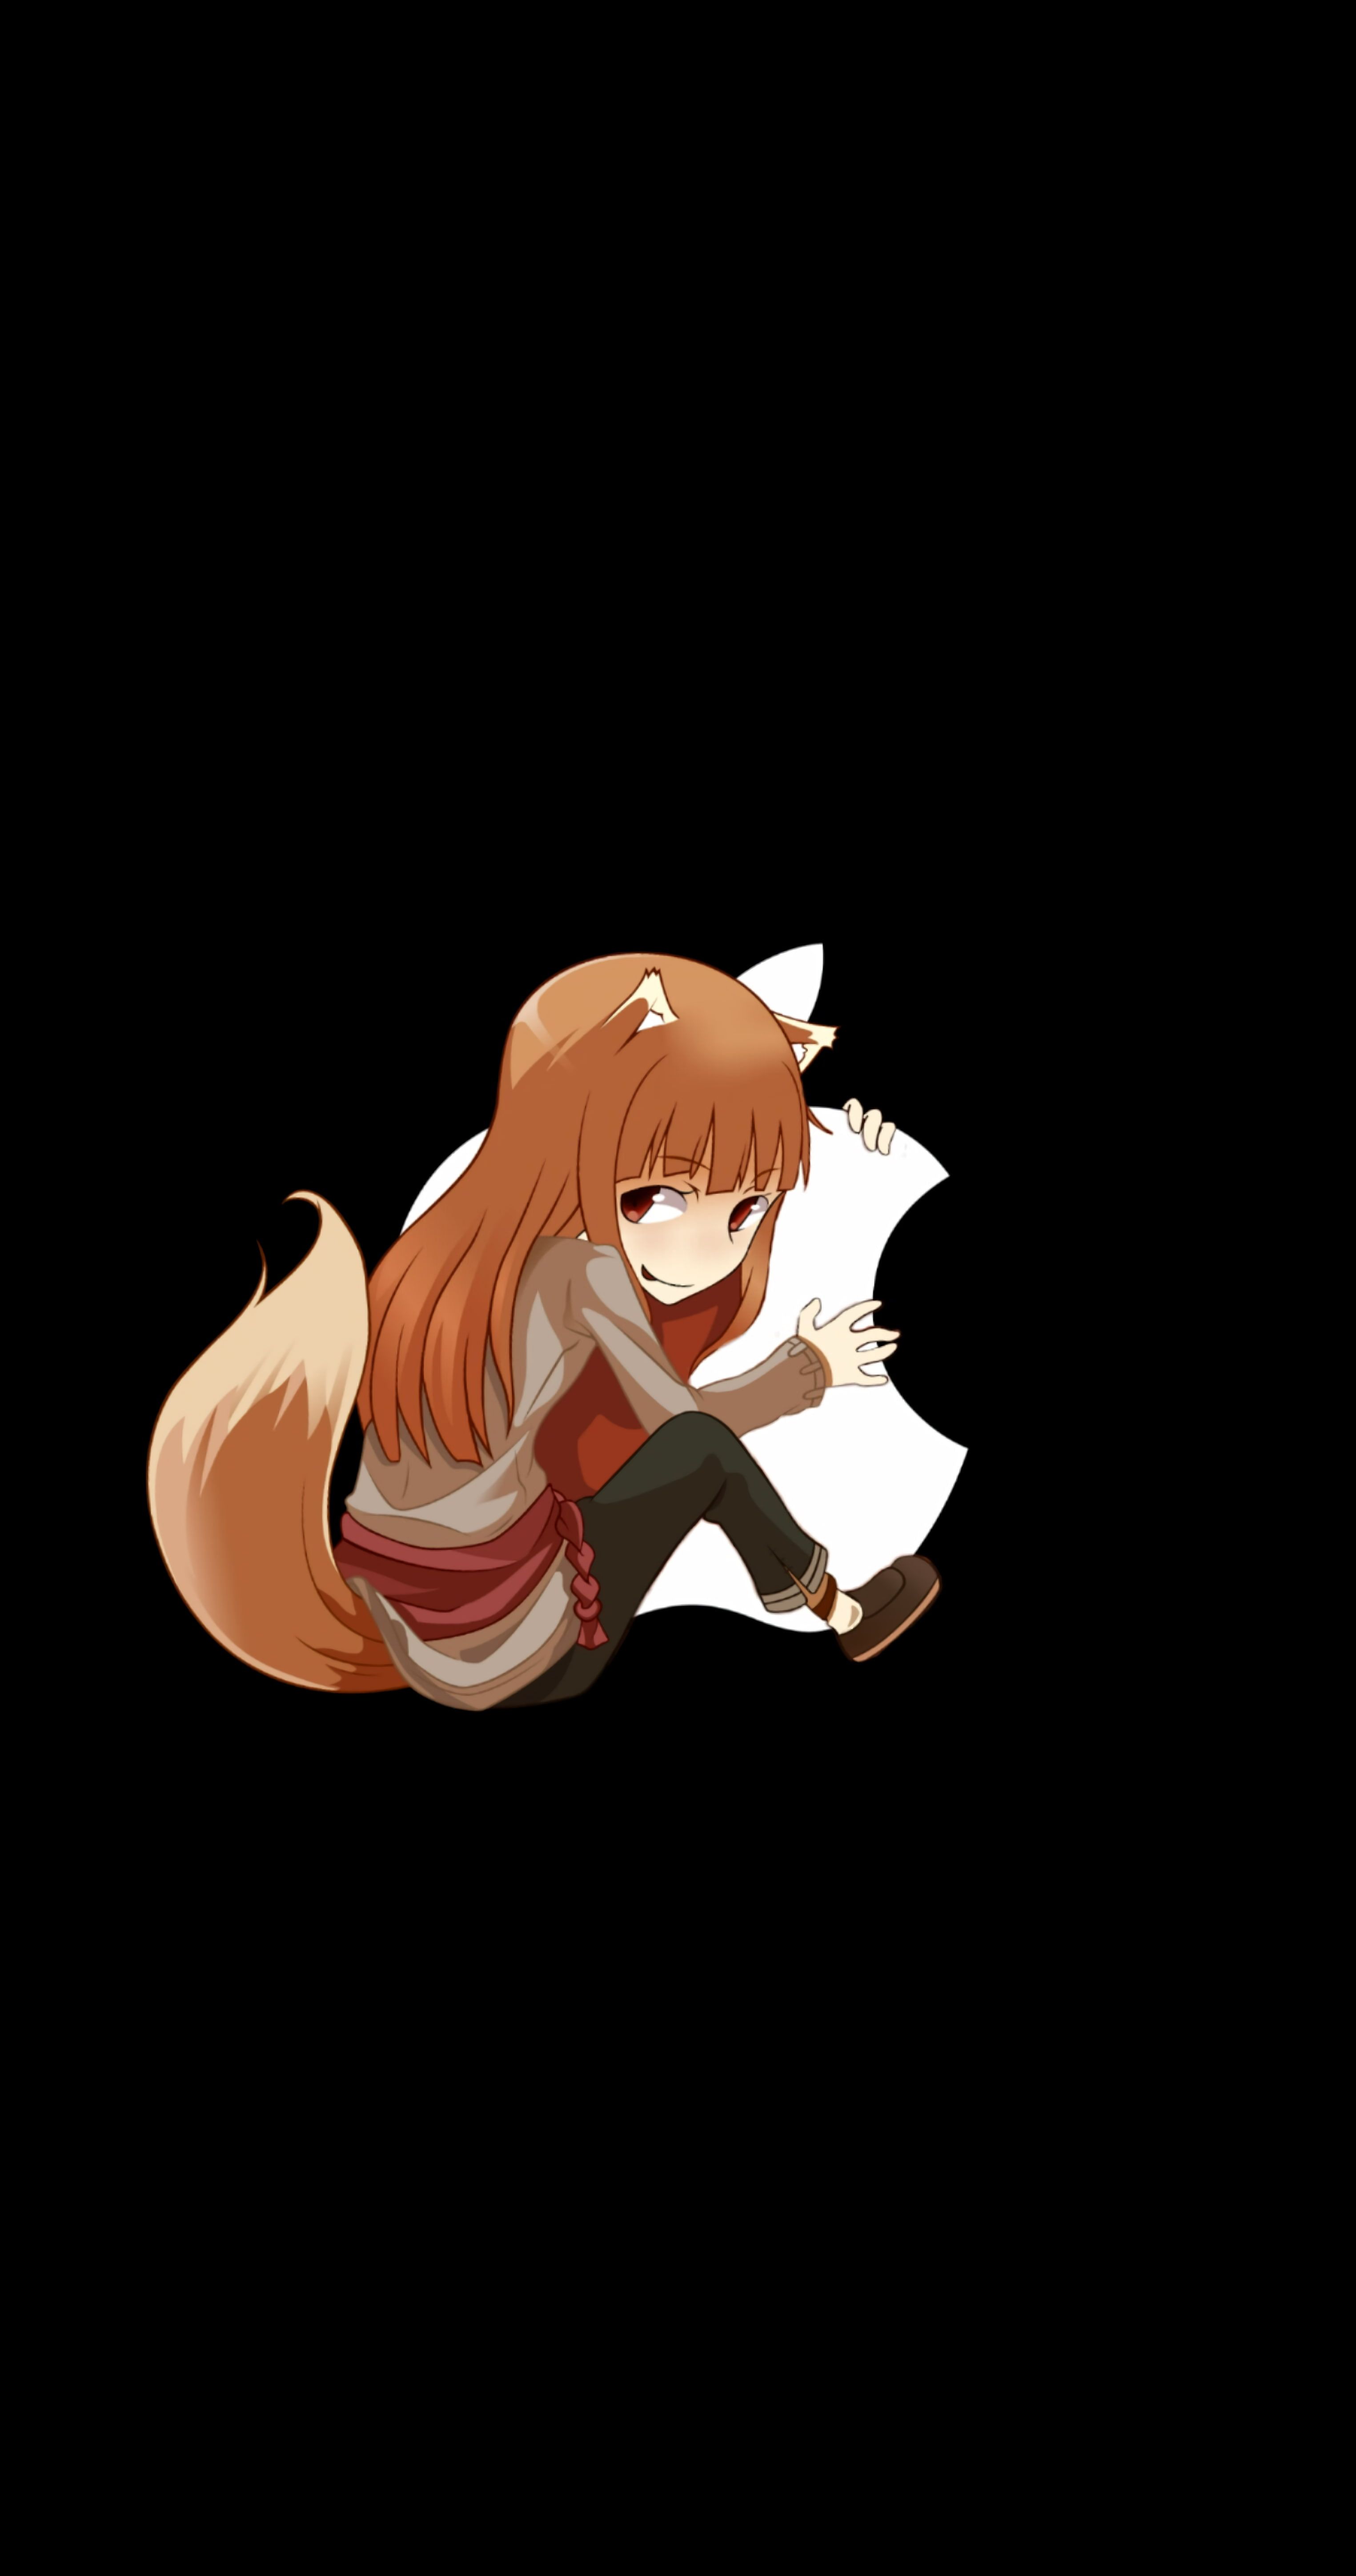 anime girls #amoled Spice and Wolf Apple Inc. #Holo K #wallpaper